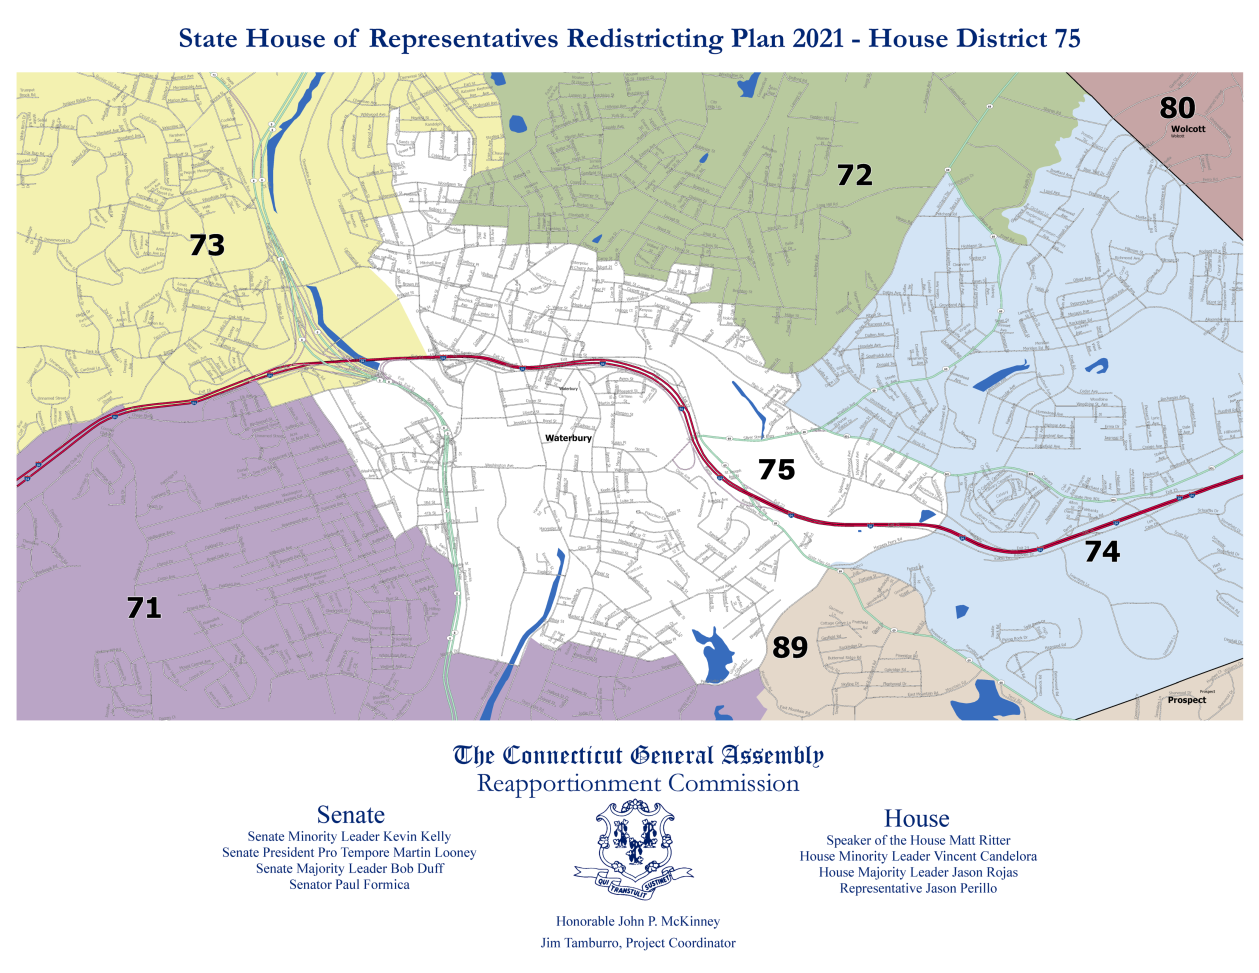 75th House District